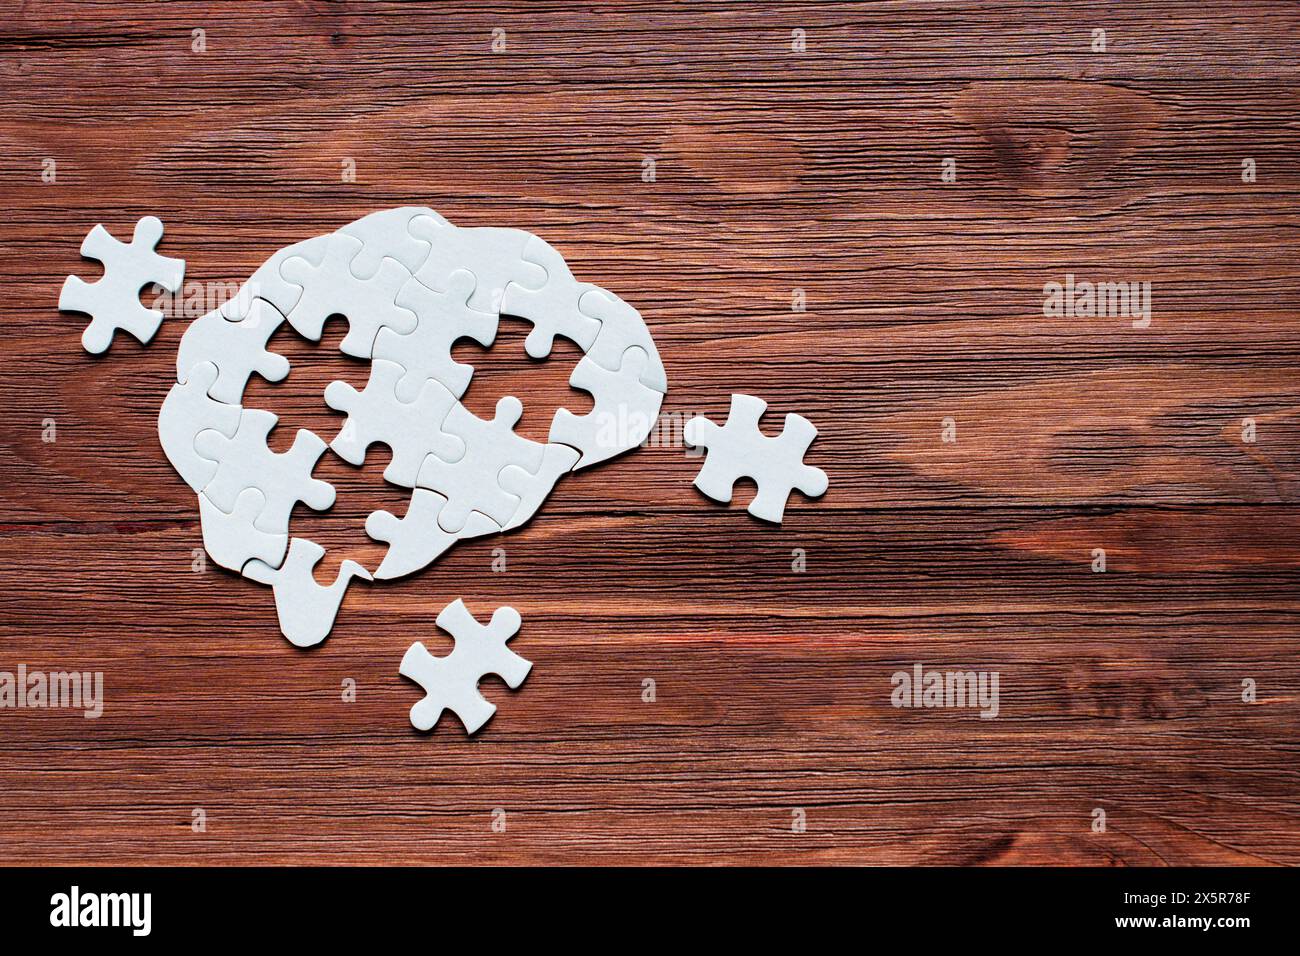 Human brain-shaped puzzle with several missing pieces lying nearby, set against a dark wooden background. Problem-solving and intellectual exploration Stock Photo